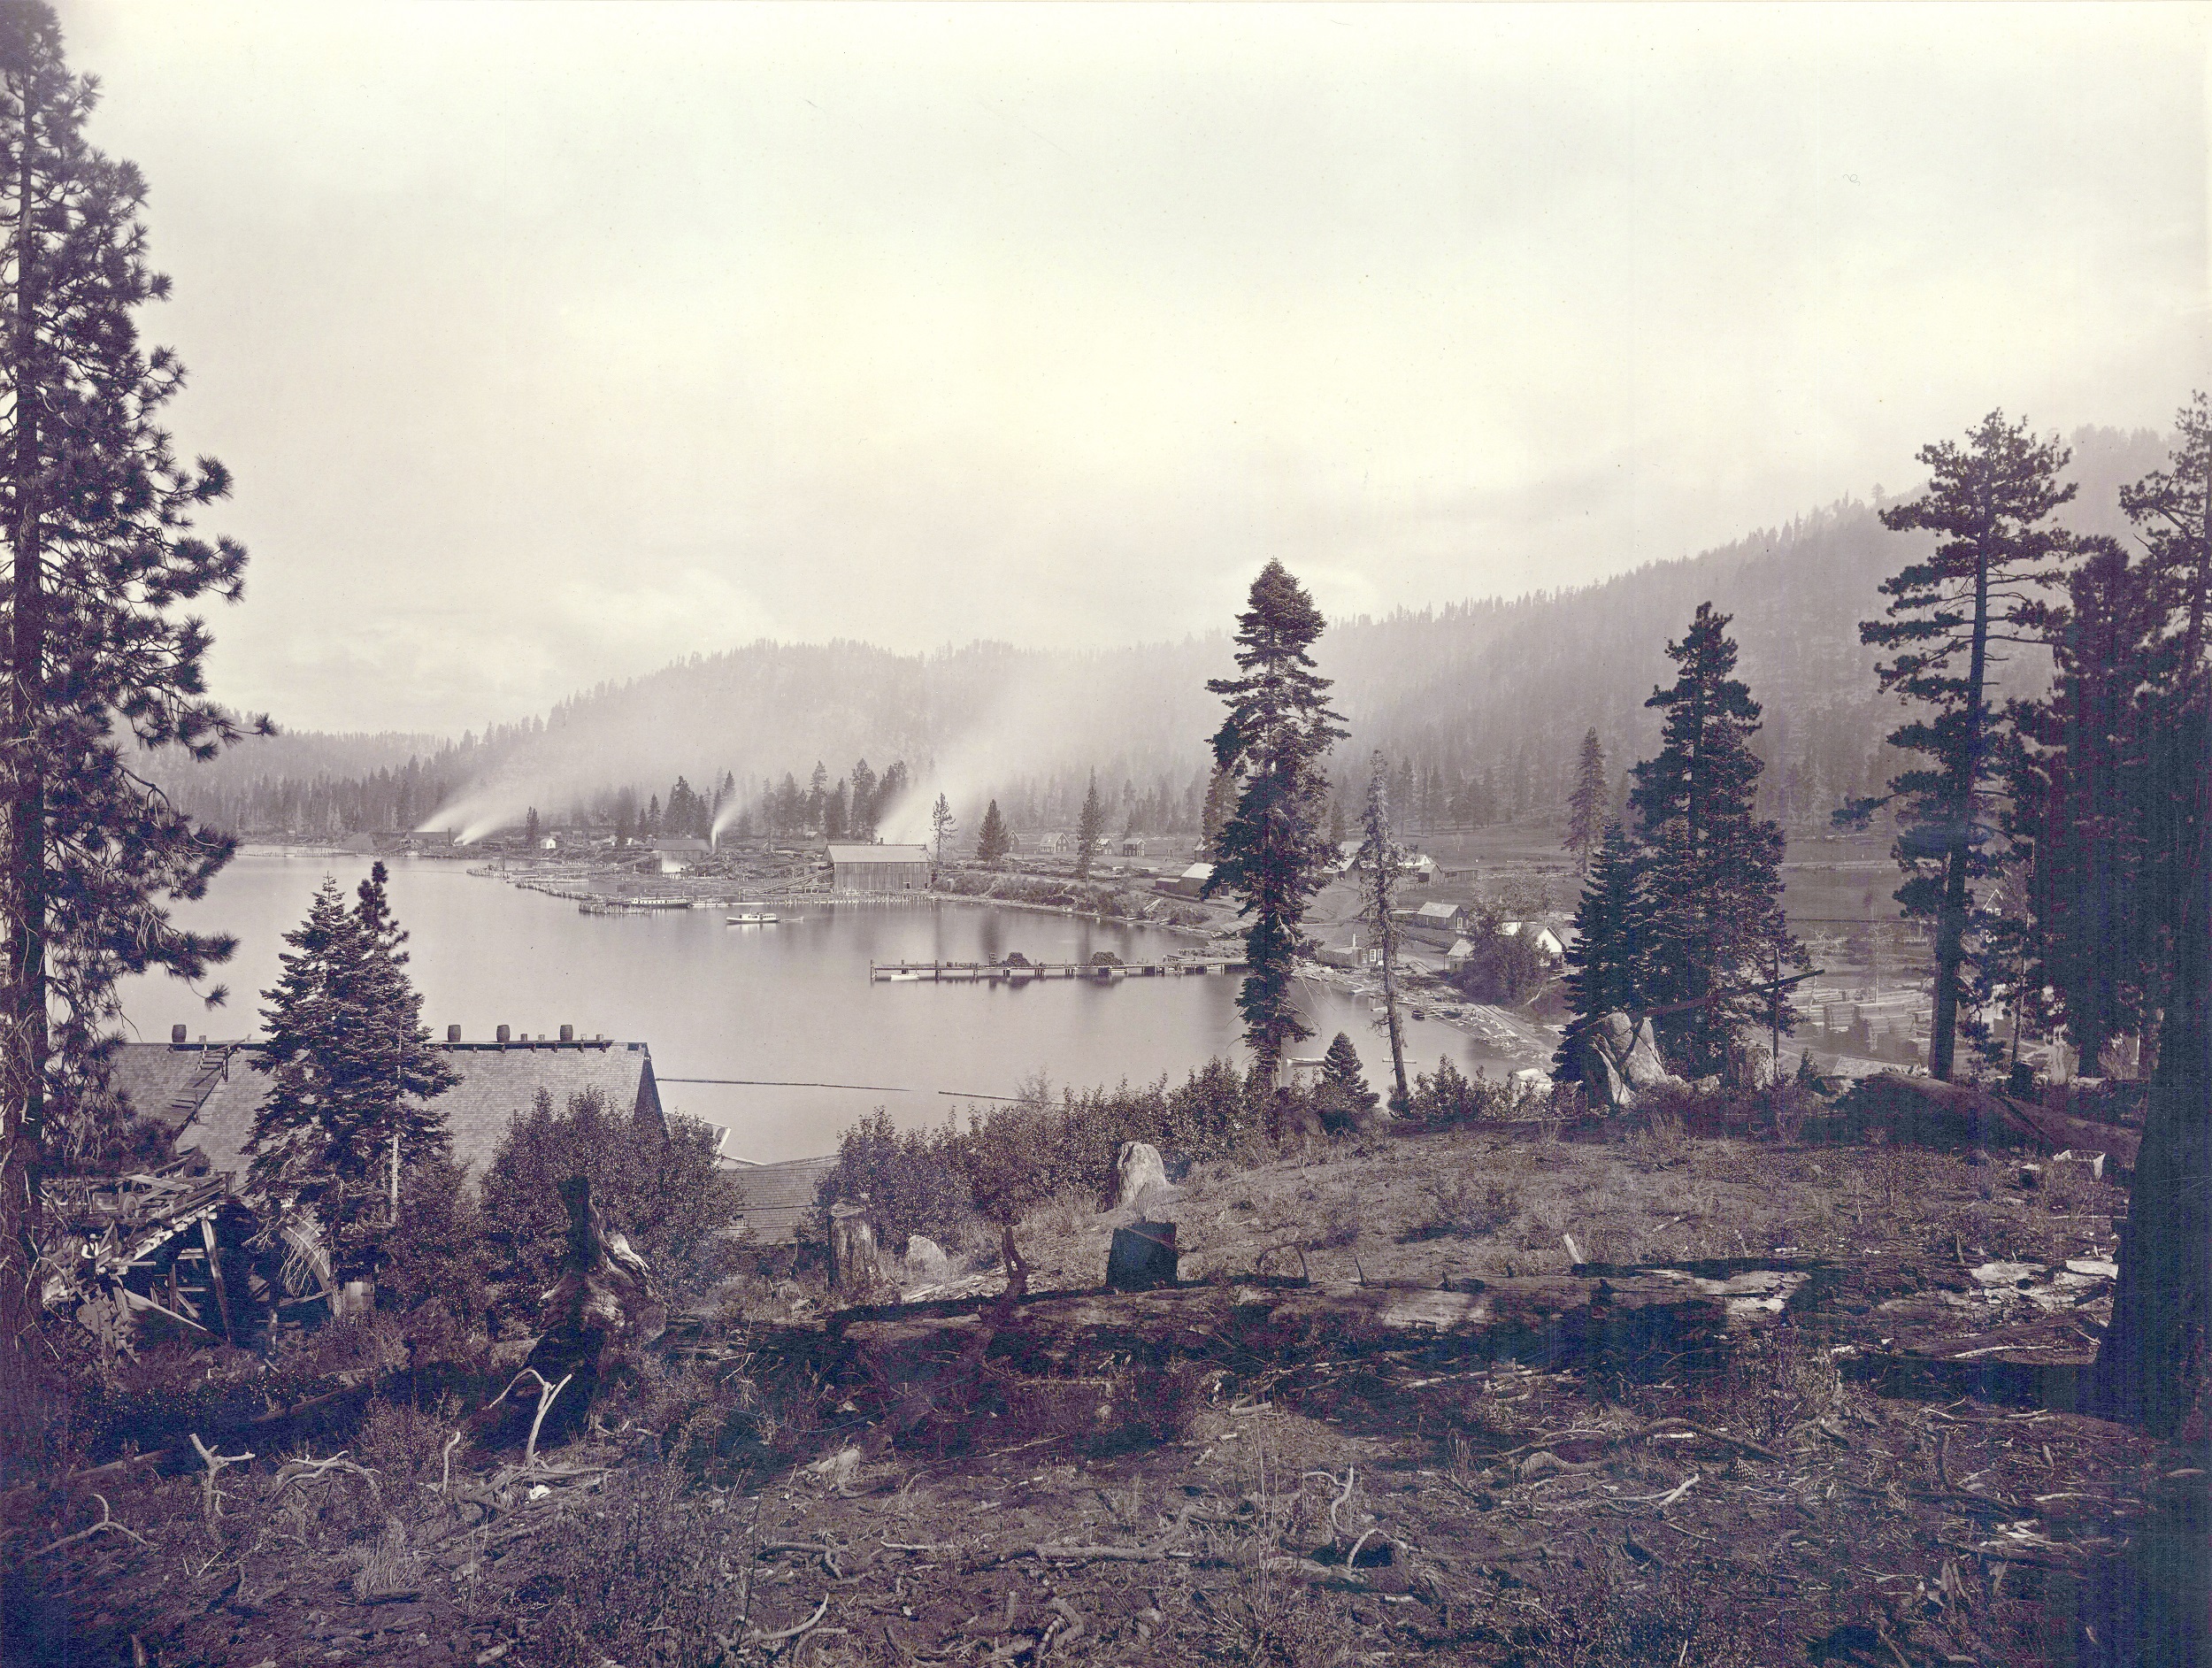 Black-and-white photograph of a lake surrounded by pine trees and rustic encampments.